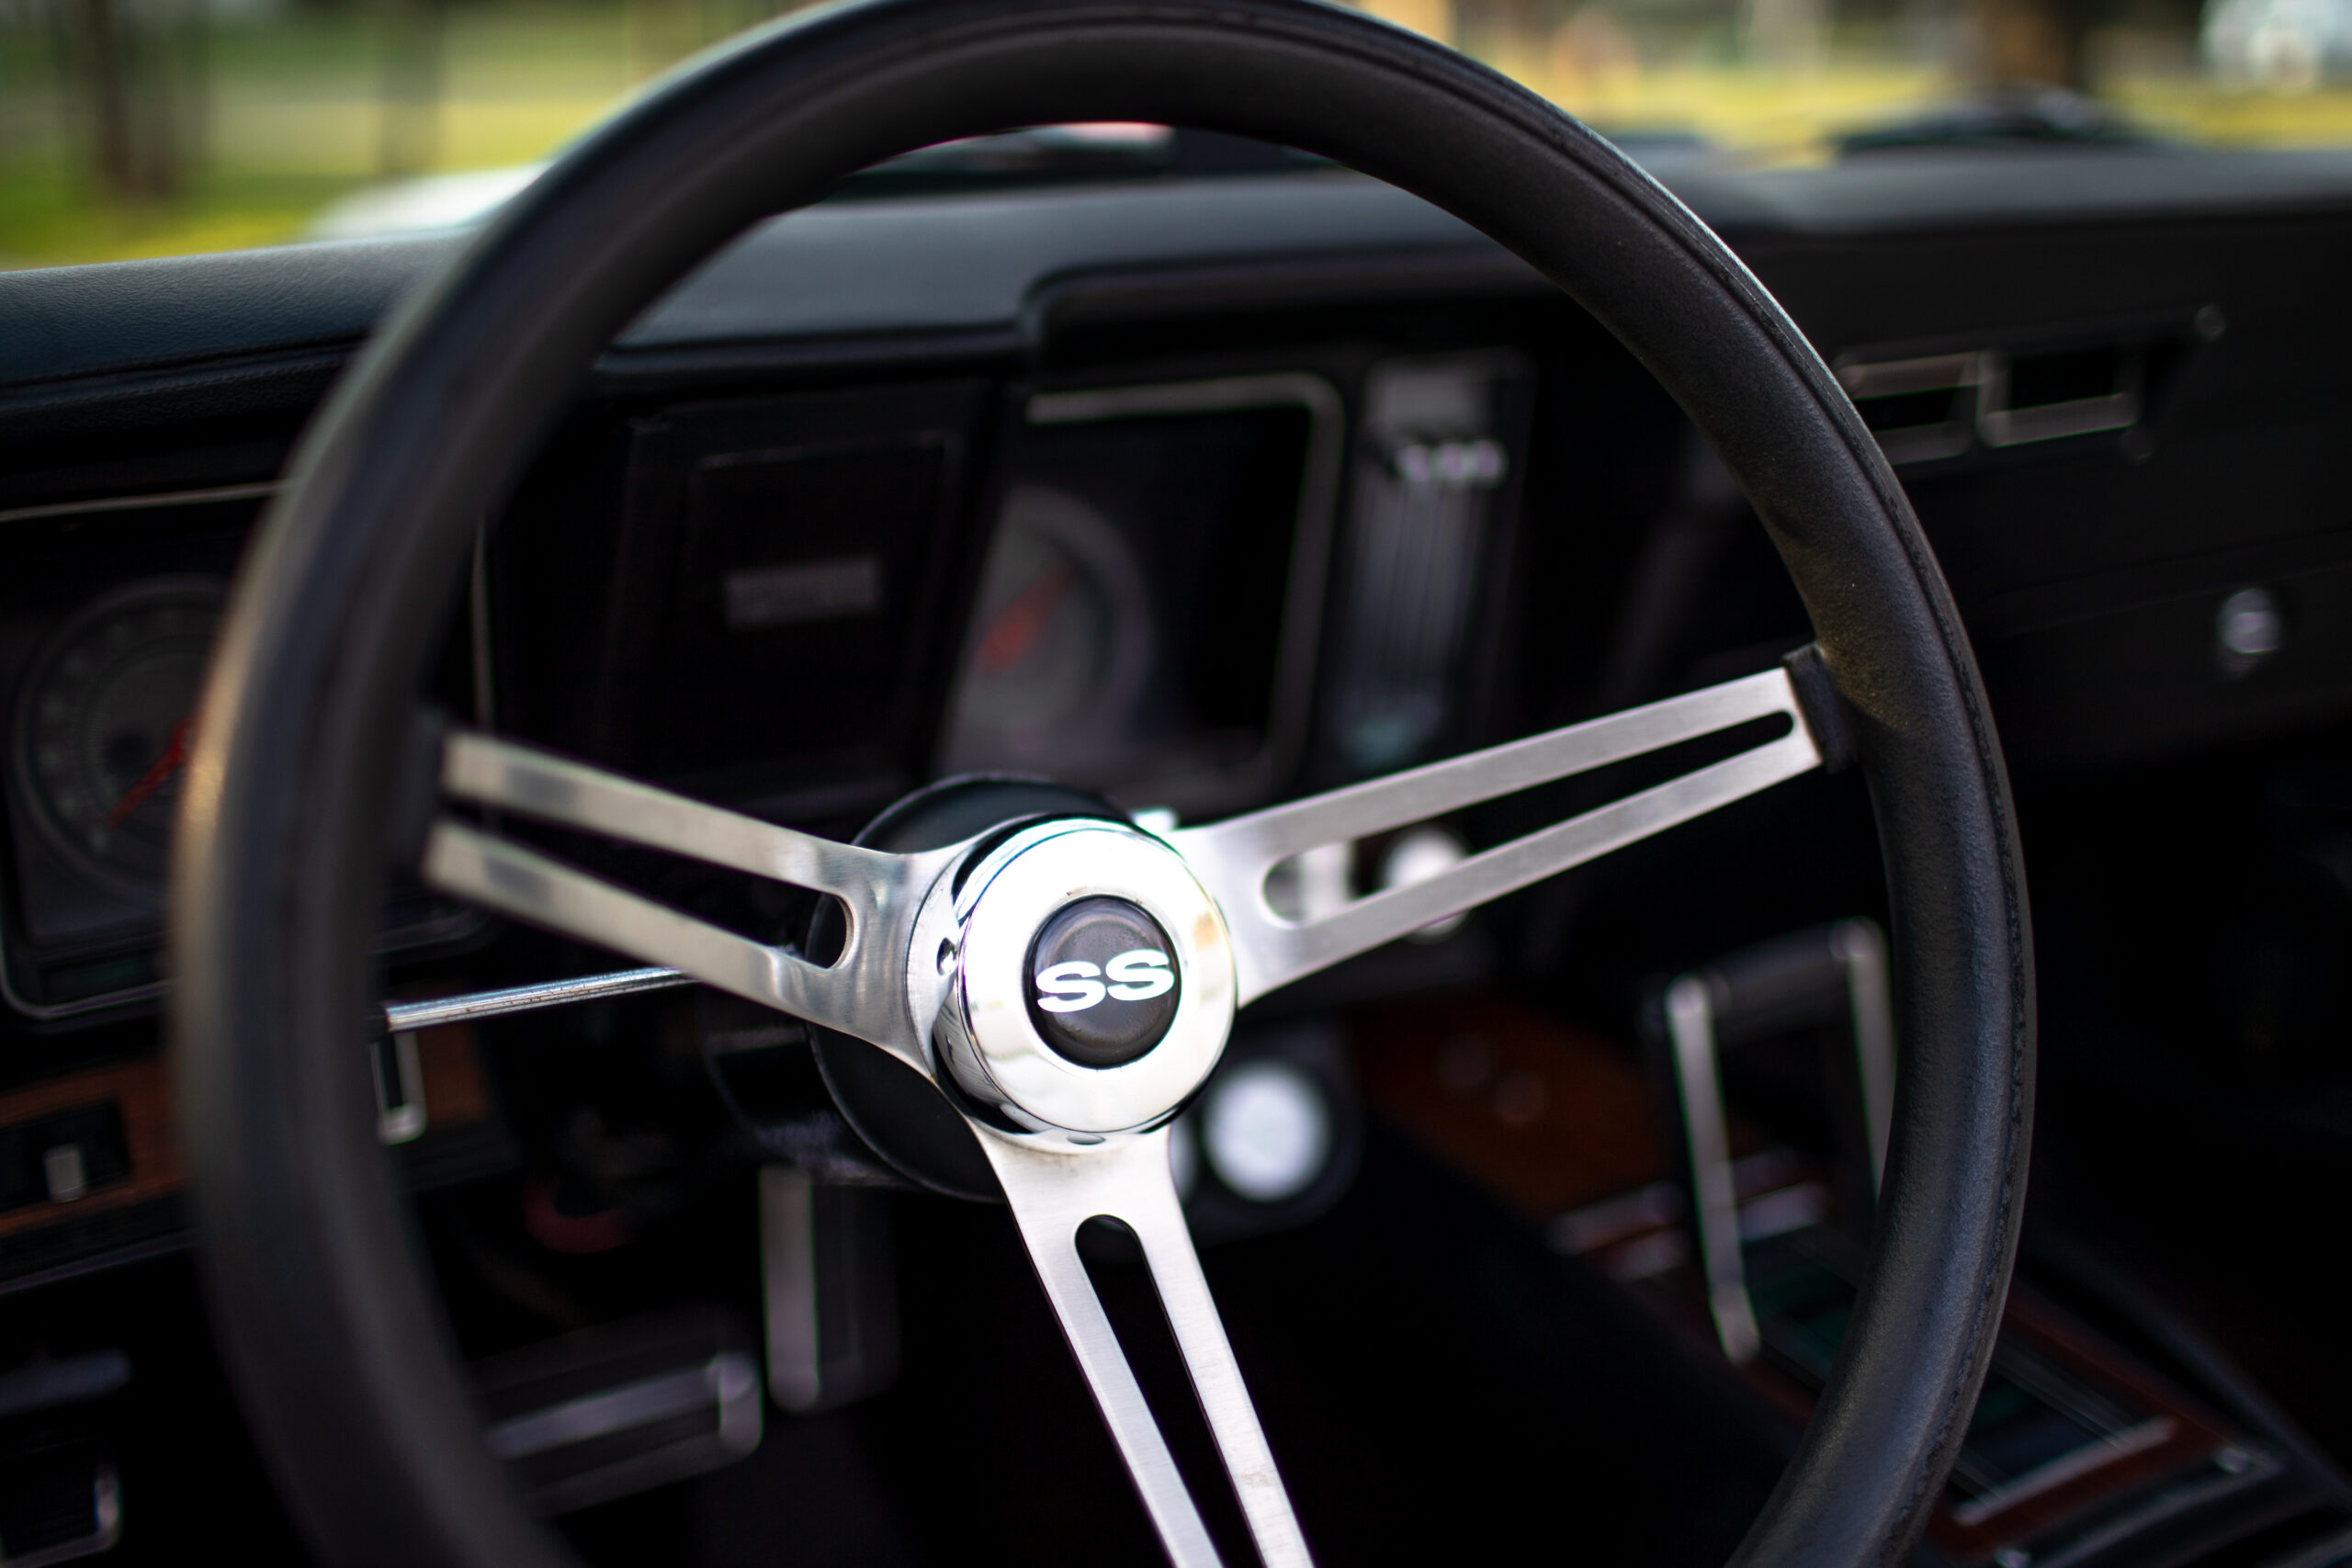 Close-up of a classic car's steering wheel with an "SS" emblem at the center, featuring a black and chrome design. The car's dashboard and gauges are visible in the background.